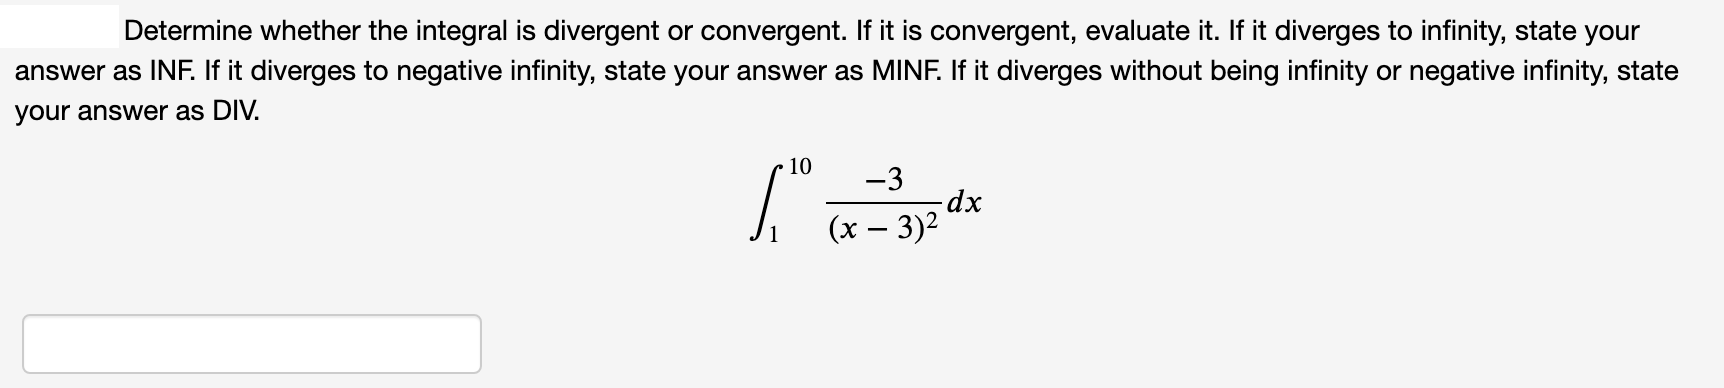 Determine whether the integral is divergent or convergent. If it is convergent, evaluate it. If it diverges to infinity, state your
answer as INF. If it diverges to negative infinity, state your answer as MINF. If it diverges without being infinity or negative infinity, state
your answer as DIV.
10
-3
-dx
(x – 3)2
